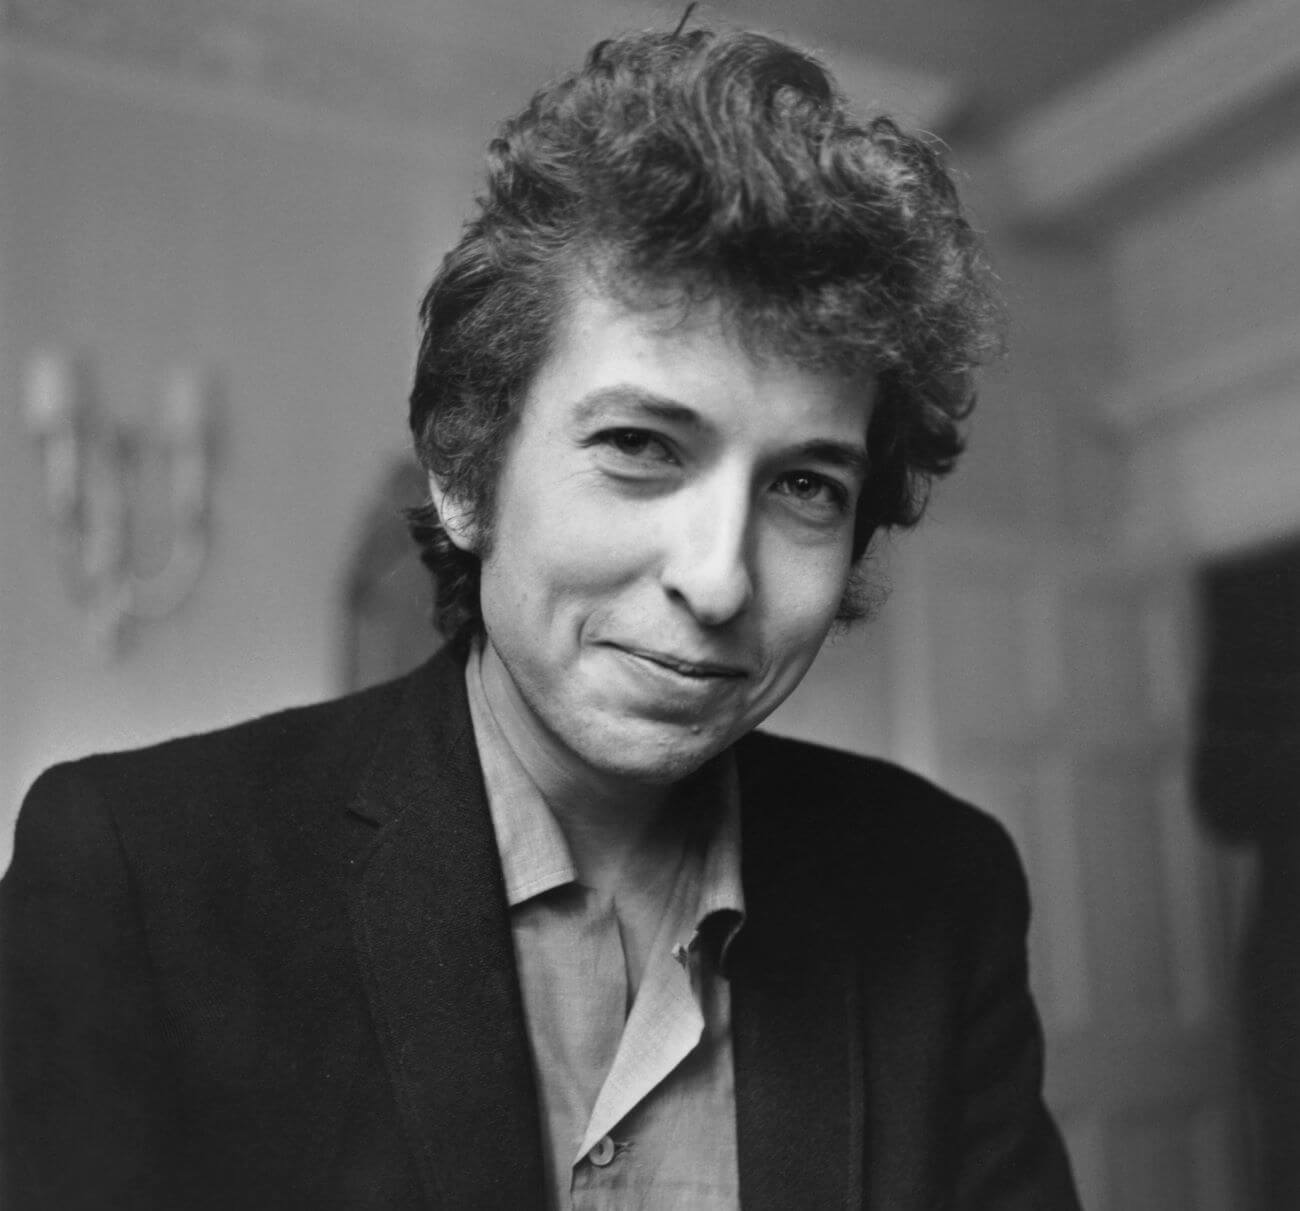 A black and white picture of Bob Dylan wearing a suit jacket and smiling.